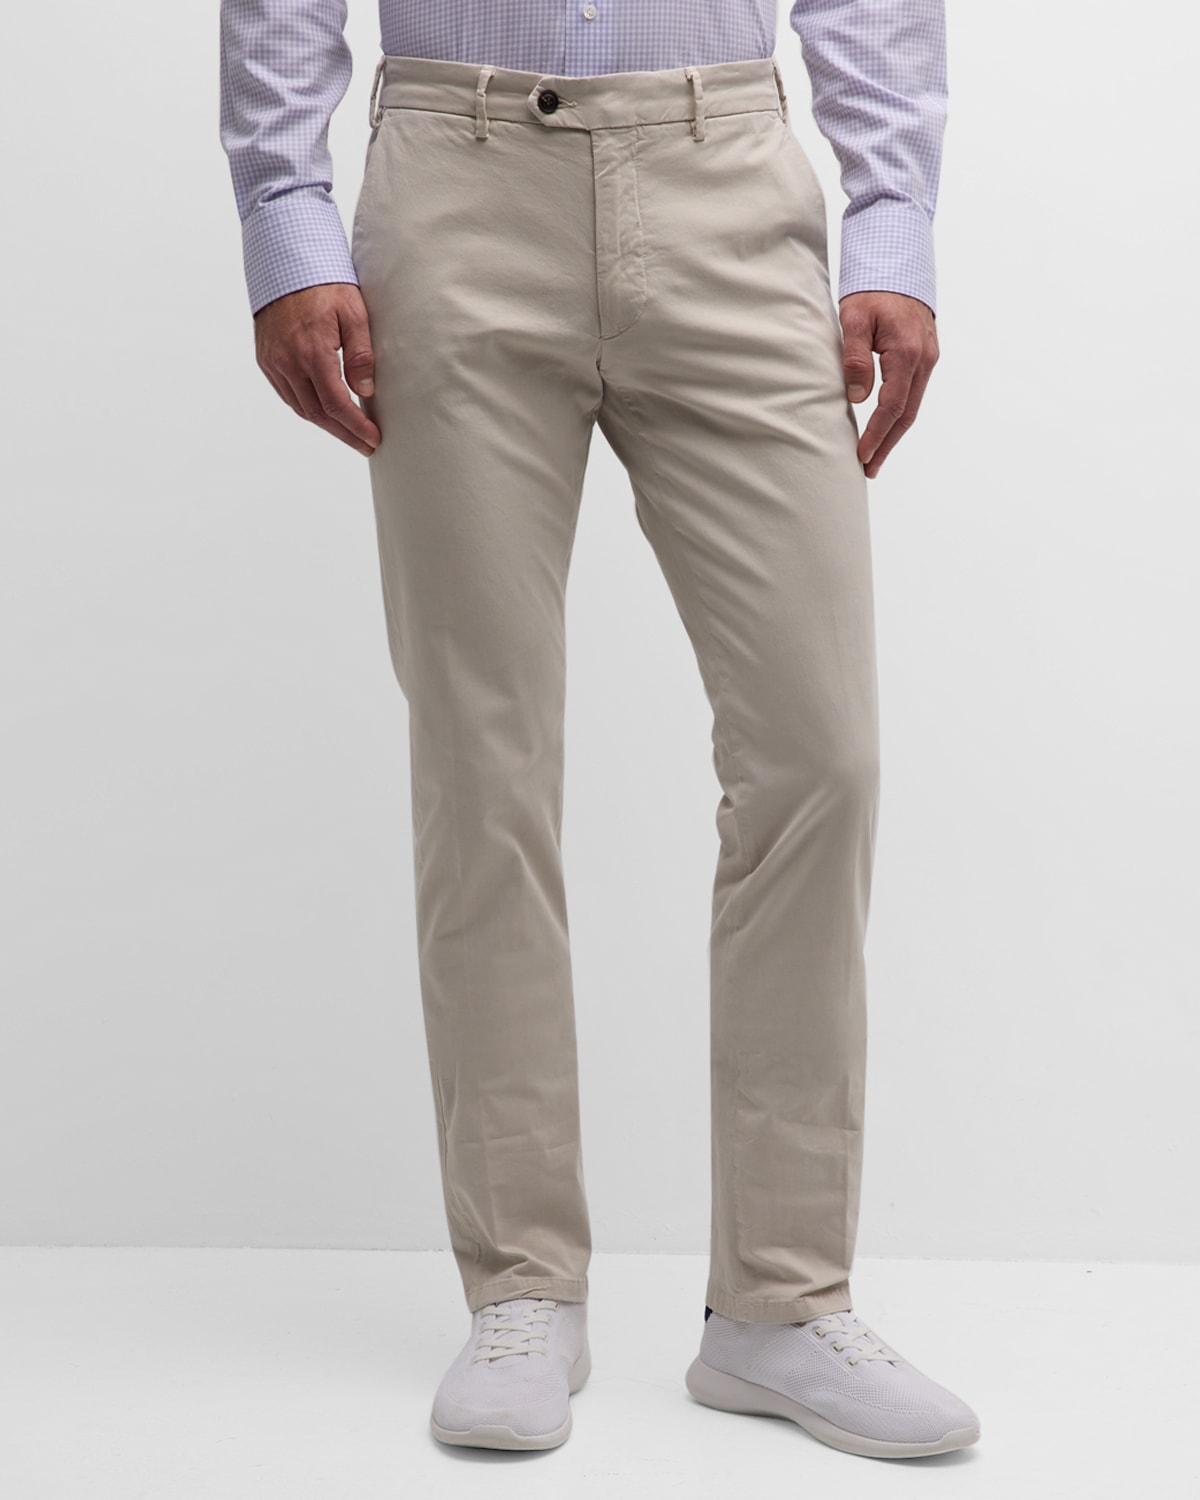 PETER MILLAR MEN'S CONCORDE GARMENT-DYED FLAT-FRONT TROUSERS